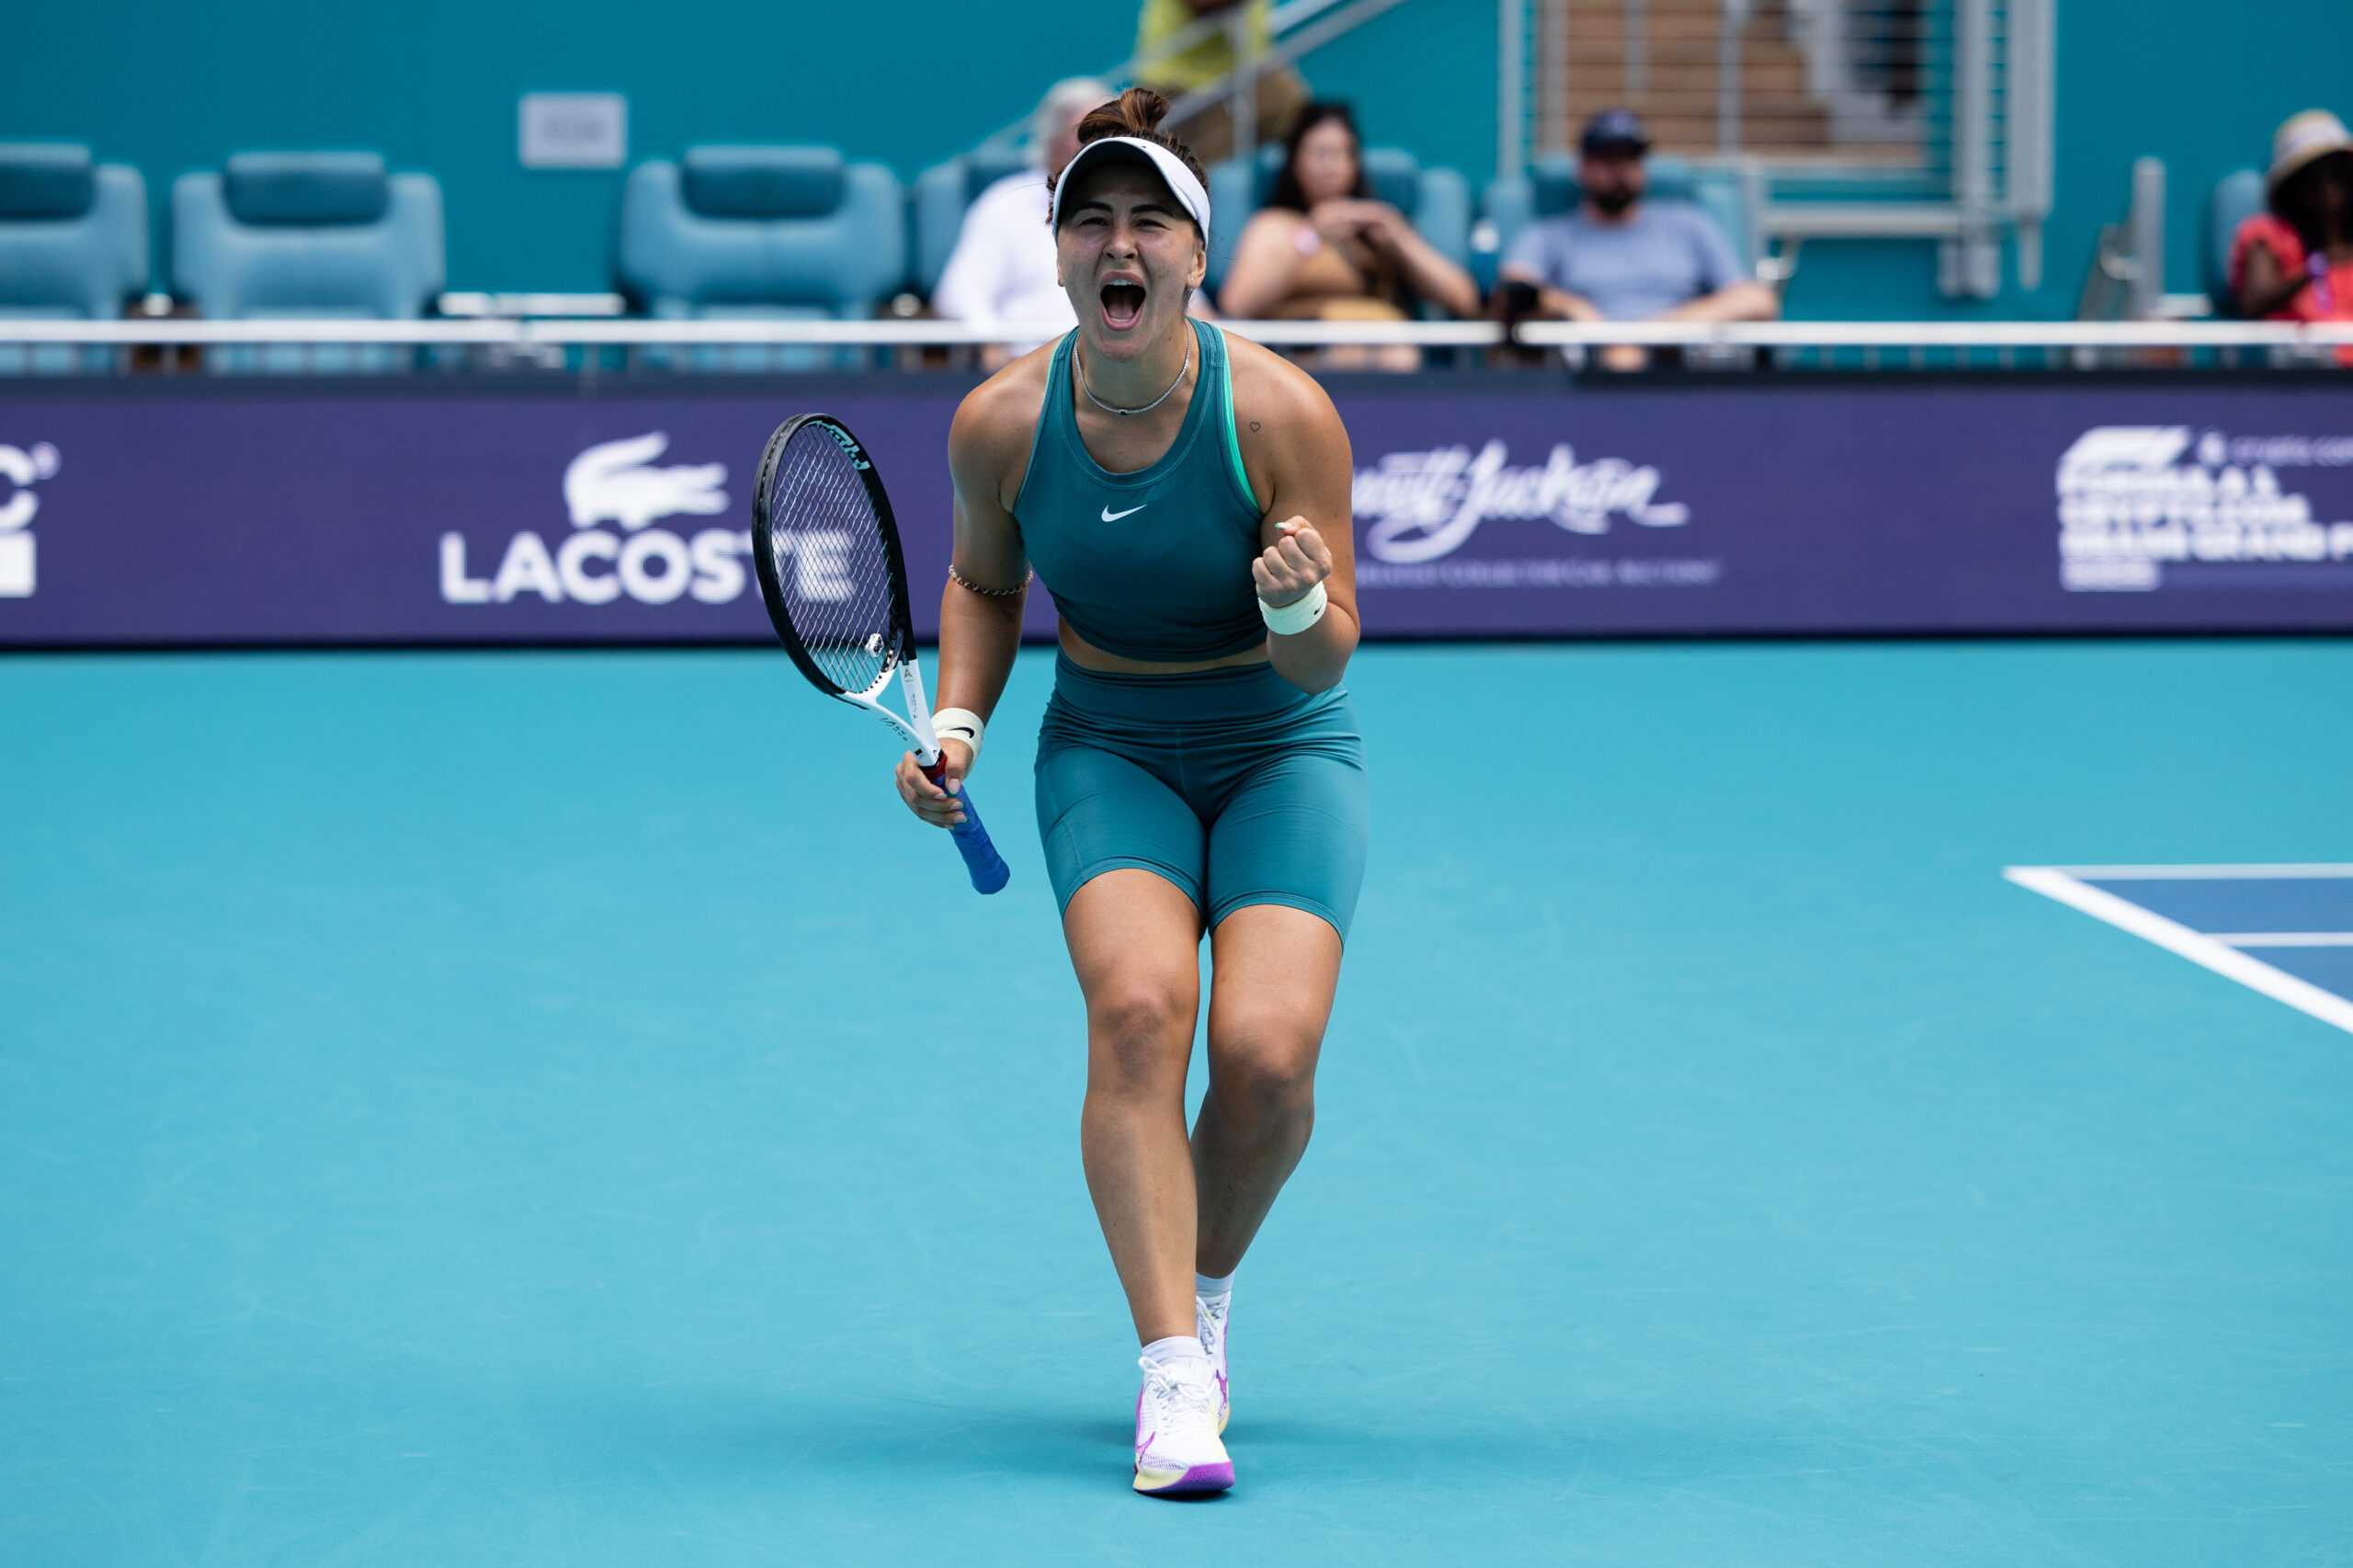 Bianca Andreescu pumped up during her match at the 2023 Miami Open on March 26.